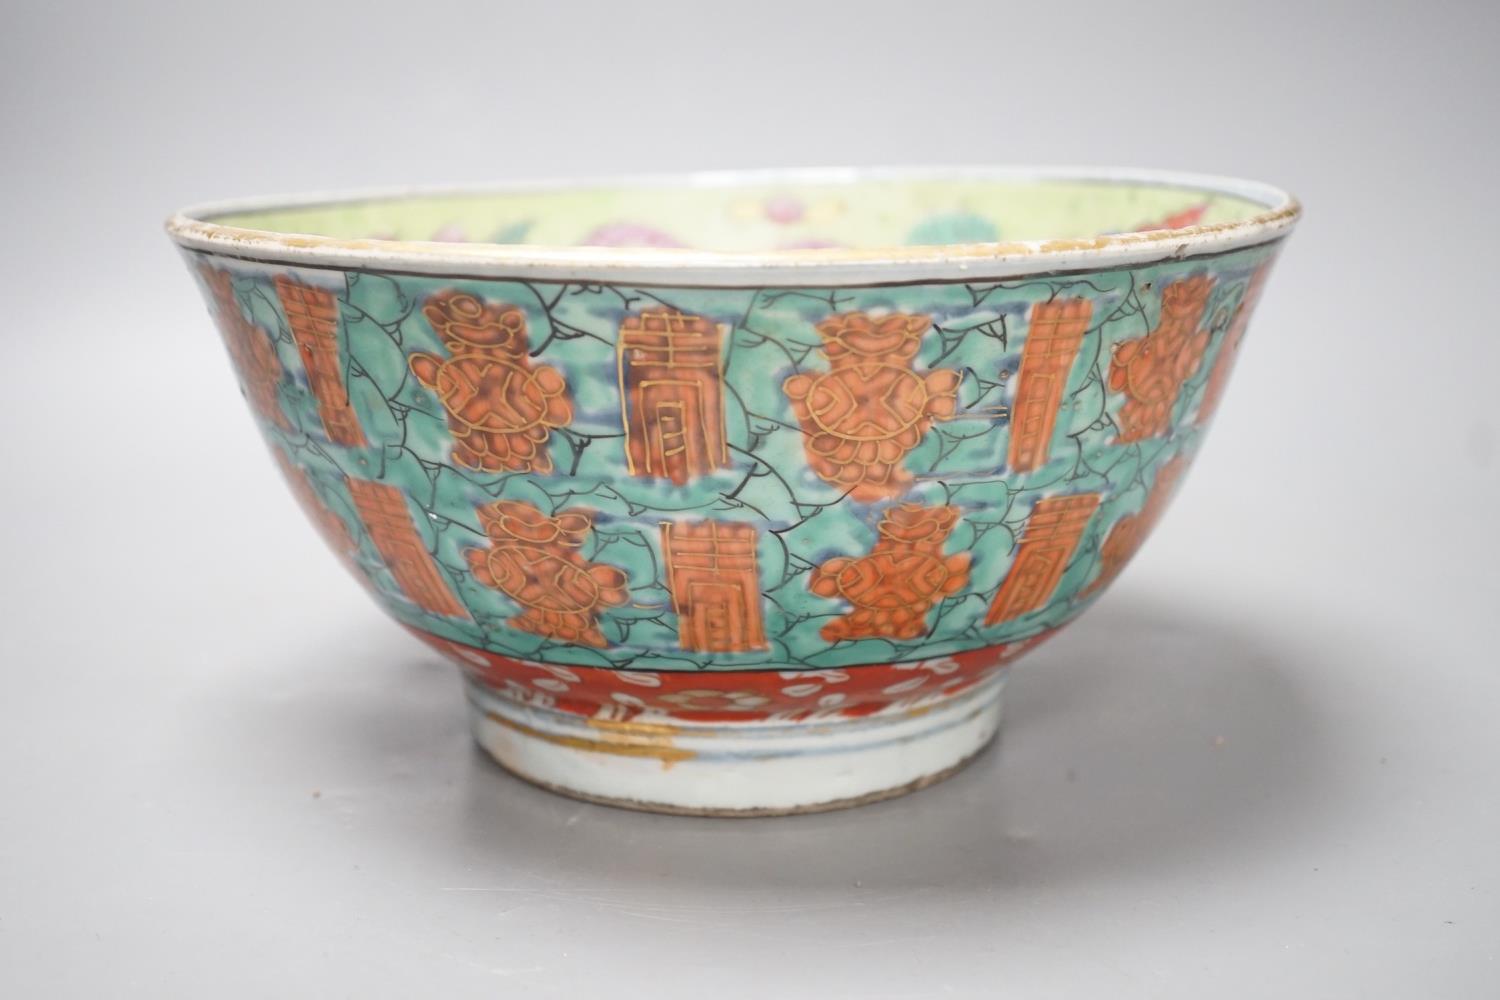 An 18th century clobbered Chinese or Japanese porcelain bowl, 24.5 cm diameter - Image 3 of 8